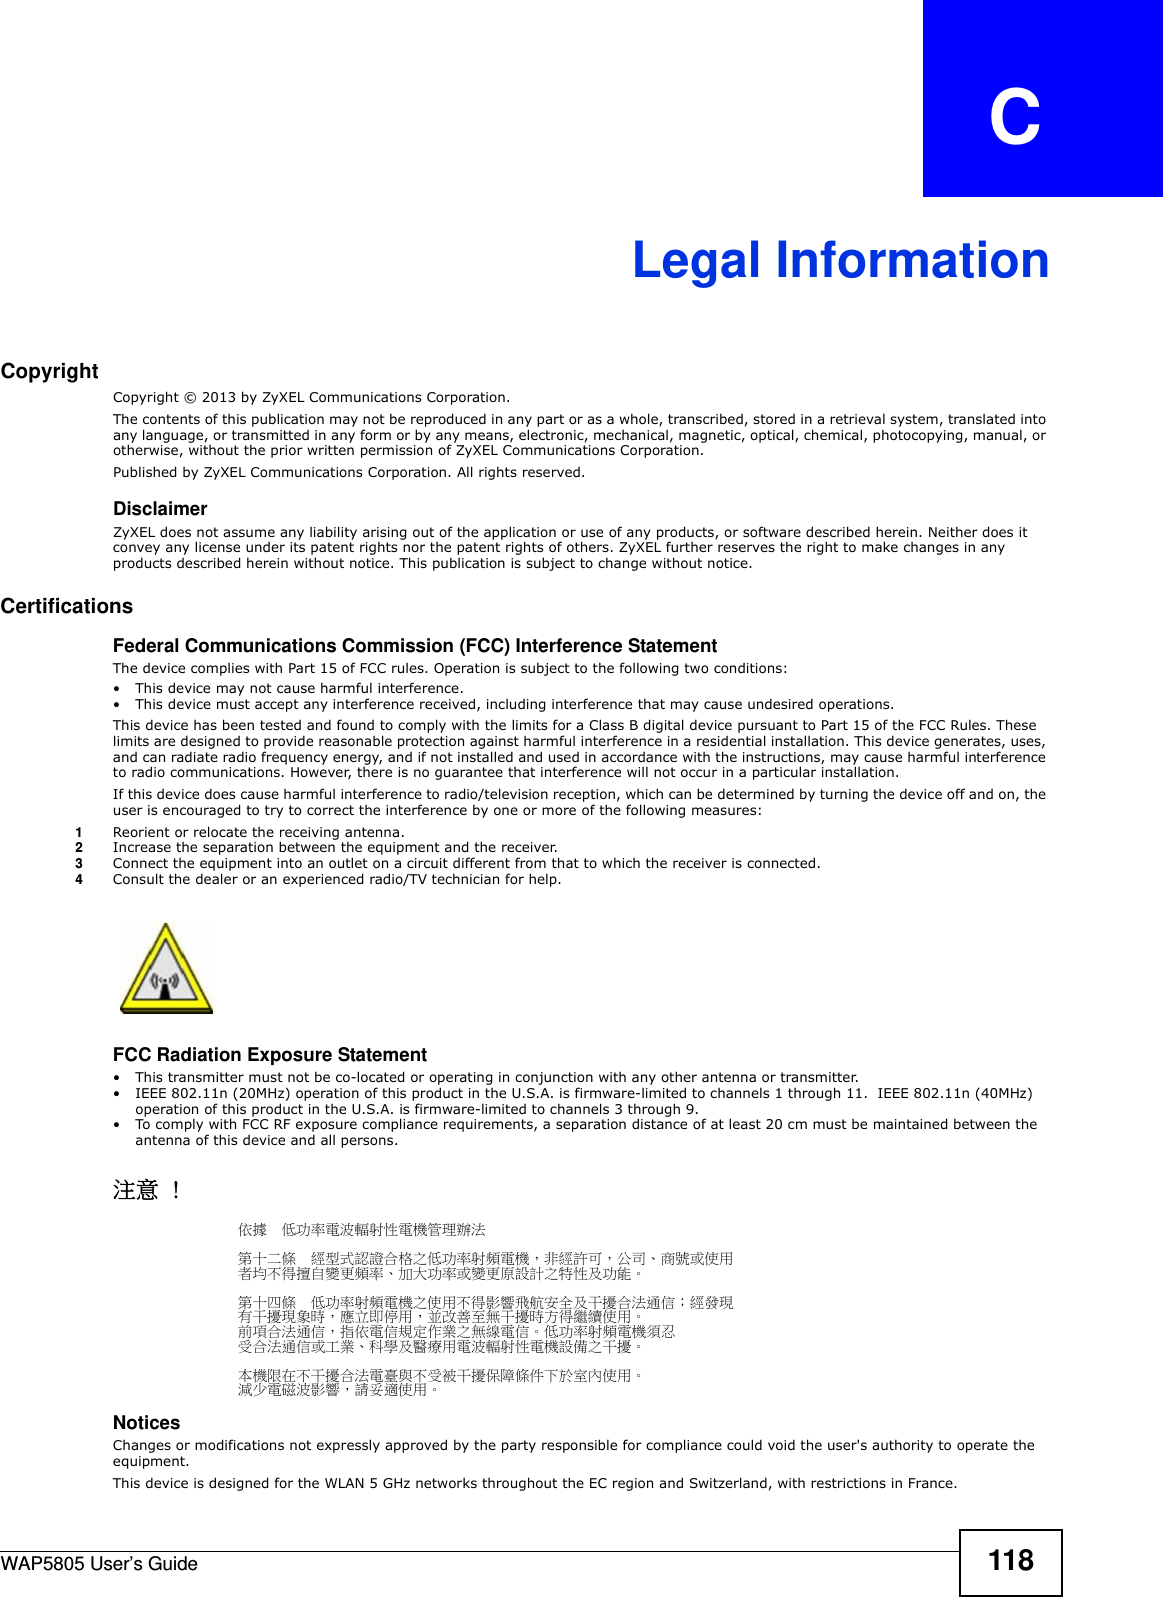 WAP5805 User’s Guide 118APPENDIX   CLegal InformationCopyrightCopyright © 2013 by ZyXEL Communications Corporation.The contents of this publication may not be reproduced in any part or as a whole, transcribed, stored in a retrieval system, translated into any language, or transmitted in any form or by any means, electronic, mechanical, magnetic, optical, chemical, photocopying, manual, or otherwise, without the prior written permission of ZyXEL Communications Corporation.Published by ZyXEL Communications Corporation. All rights reserved.DisclaimerZyXEL does not assume any liability arising out of the application or use of any products, or software described herein. Neither does it convey any license under its patent rights nor the patent rights of others. ZyXEL further reserves the right to make changes in any products described herein without notice. This publication is subject to change without notice.Certifications Federal Communications Commission (FCC) Interference StatementThe device complies with Part 15 of FCC rules. Operation is subject to the following two conditions:• This device may not cause harmful interference.• This device must accept any interference received, including interference that may cause undesired operations.This device has been tested and found to comply with the limits for a Class B digital device pursuant to Part 15 of the FCC Rules. These limits are designed to provide reasonable protection against harmful interference in a residential installation. This device generates, uses, and can radiate radio frequency energy, and if not installed and used in accordance with the instructions, may cause harmful interference to radio communications. However, there is no guarantee that interference will not occur in a particular installation.If this device does cause harmful interference to radio/television reception, which can be determined by turning the device off and on, the user is encouraged to try to correct the interference by one or more of the following measures:1Reorient or relocate the receiving antenna.2Increase the separation between the equipment and the receiver.3Connect the equipment into an outlet on a circuit different from that to which the receiver is connected.4Consult the dealer or an experienced radio/TV technician for help.FCC Radiation Exposure Statement• This transmitter must not be co-located or operating in conjunction with any other antenna or transmitter. • IEEE 802.11n (20MHz) operation of this product in the U.S.A. is firmware-limited to channels 1 through 11.  IEEE 802.11n (40MHz) operation of this product in the U.S.A. is firmware-limited to channels 3 through 9. • To comply with FCC RF exposure compliance requirements, a separation distance of at least 20 cm must be maintained between the antenna of this device and all persons. 注意 !依據  低功率電波輻射性電機管理辦法第十二條  經型式認證合格之低功率射頻電機，非經許可，公司、商號或使用者均不得擅自變更頻率、加大功率或變更原設計之特性及功能。第十四條  低功率射頻電機之使用不得影響飛航安全及干擾合法通信；經發現有干擾現象時，應立即停用，並改善至無干擾時方得繼續使用。前項合法通信，指依電信規定作業之無線電信。低功率射頻電機須忍受合法通信或工業、科學及醫療用電波輻射性電機設備之干擾。 本機限在不干擾合法電臺與不受被干擾保障條件下於室內使用。 減少電磁波影響，請妥適使用。Notices Changes or modifications not expressly approved by the party responsible for compliance could void the user&apos;s authority to operate the equipment.This device is designed for the WLAN 5 GHz networks throughout the EC region and Switzerland, with restrictions in France.